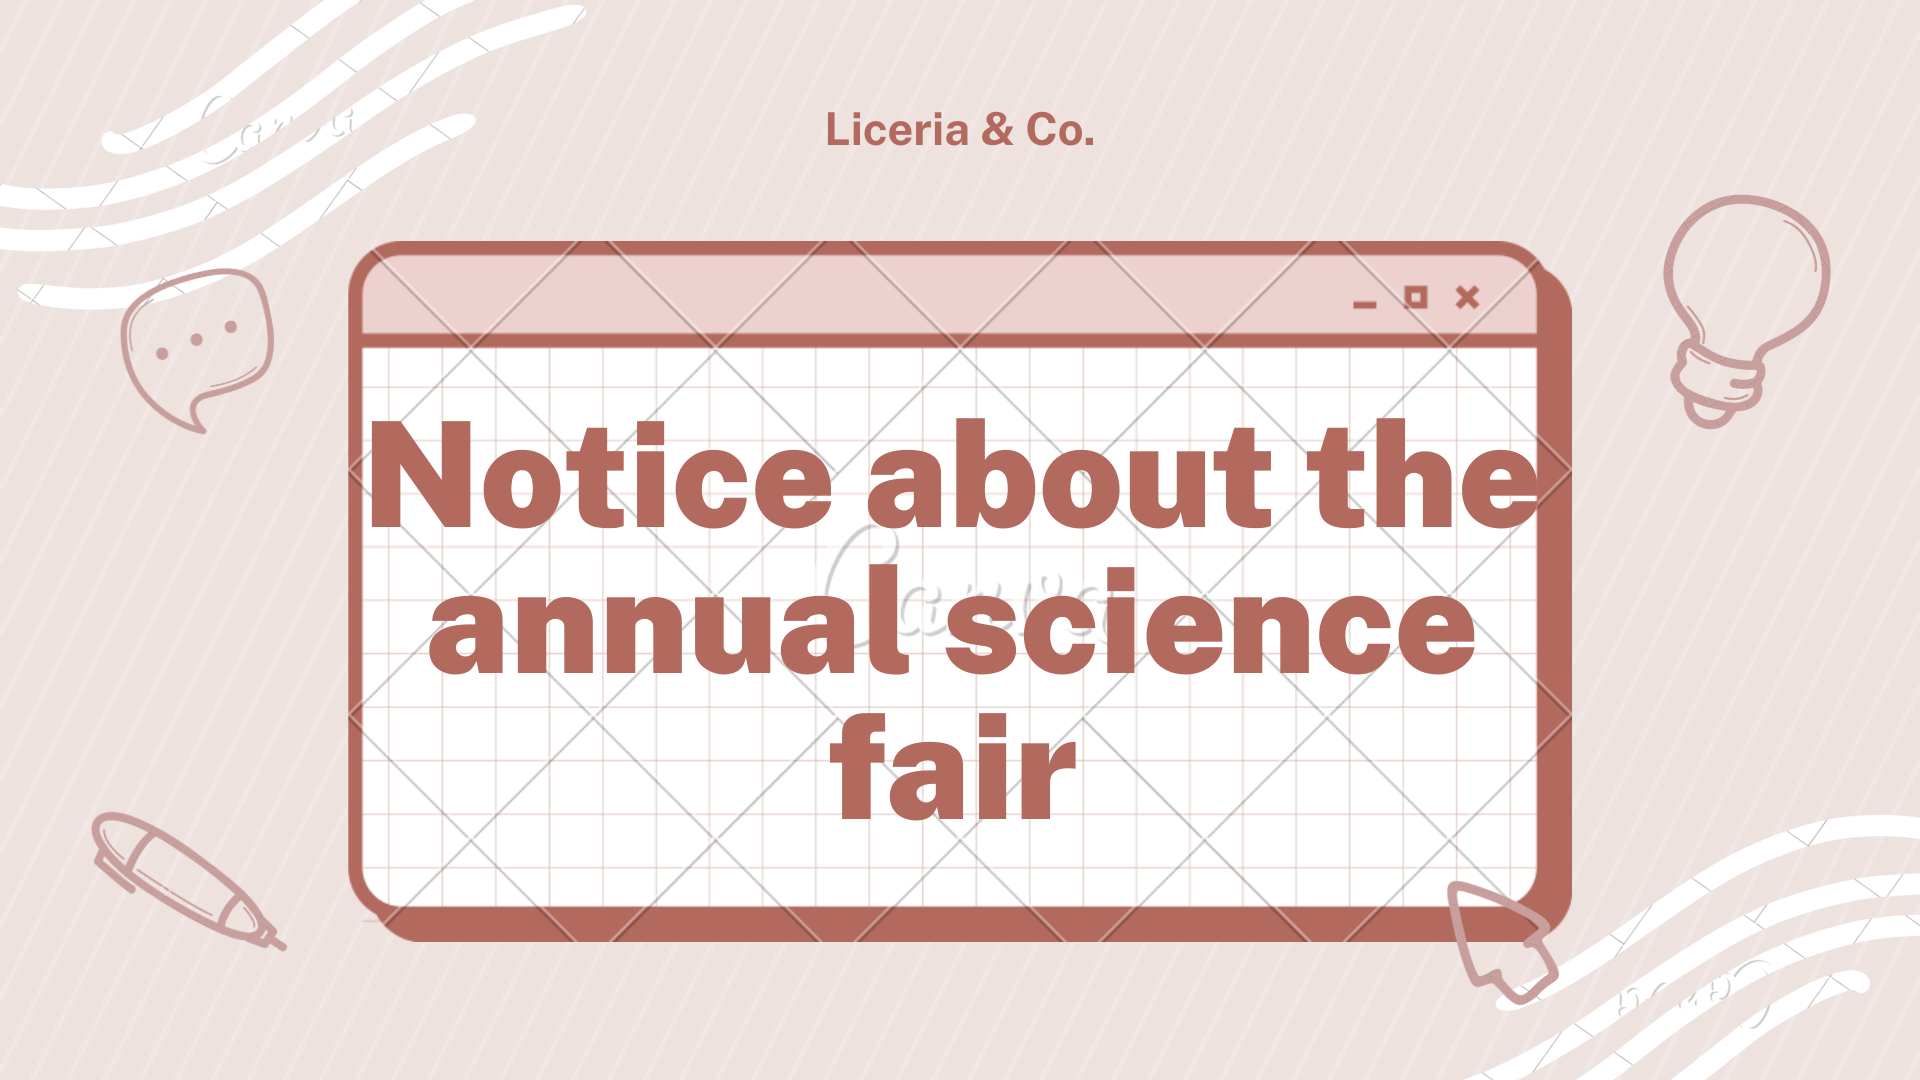 Notice about the annual science fair